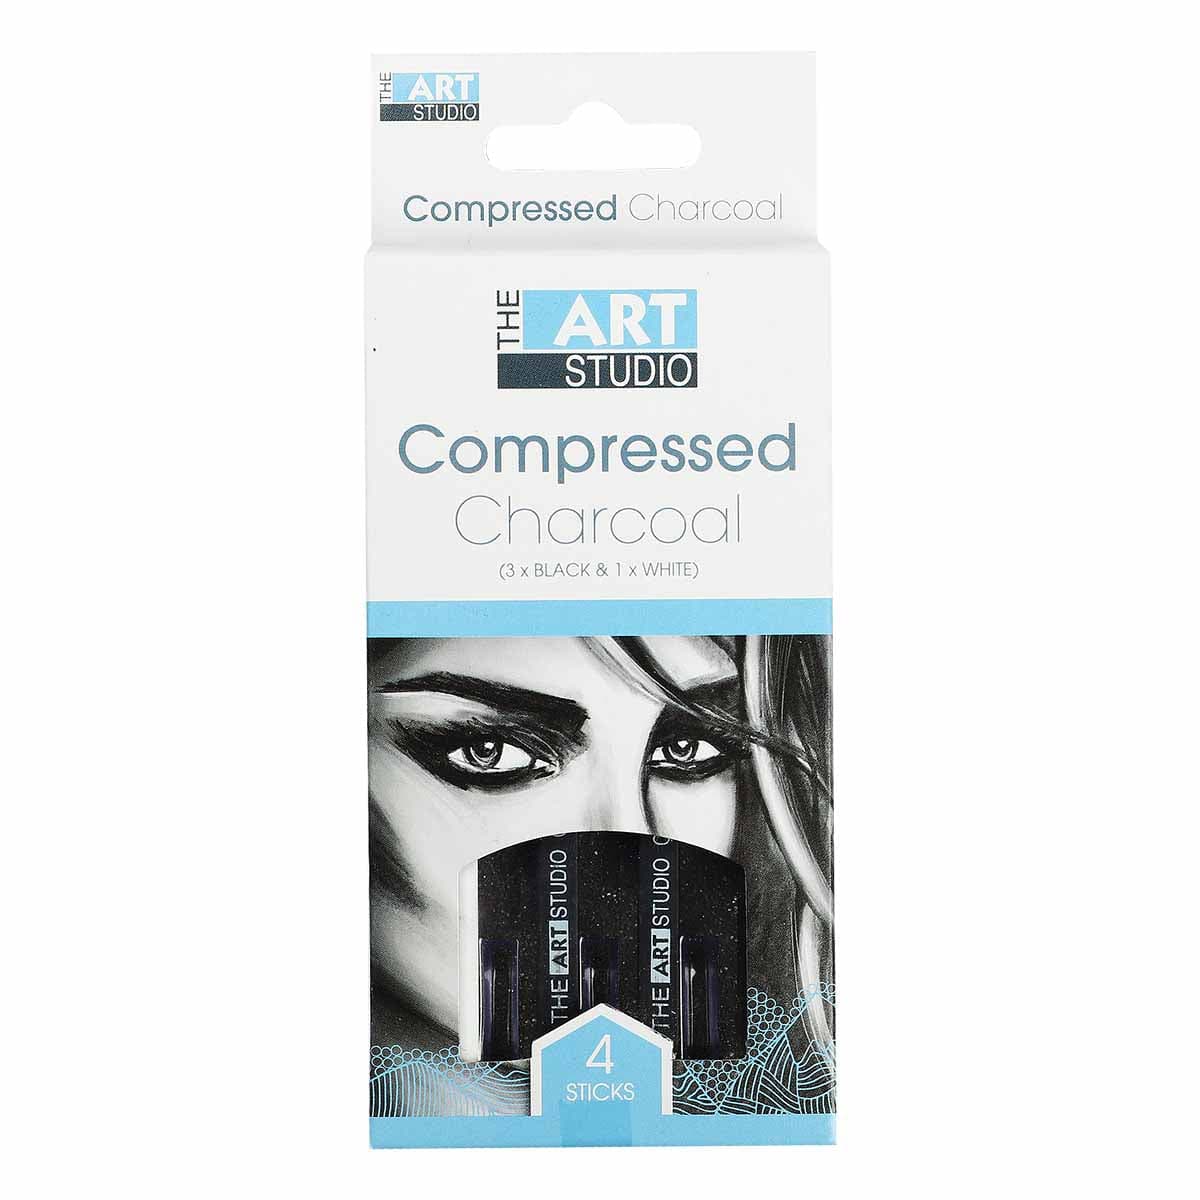 Image of The Art Studio Compressed Charcoal (4 Pieces)